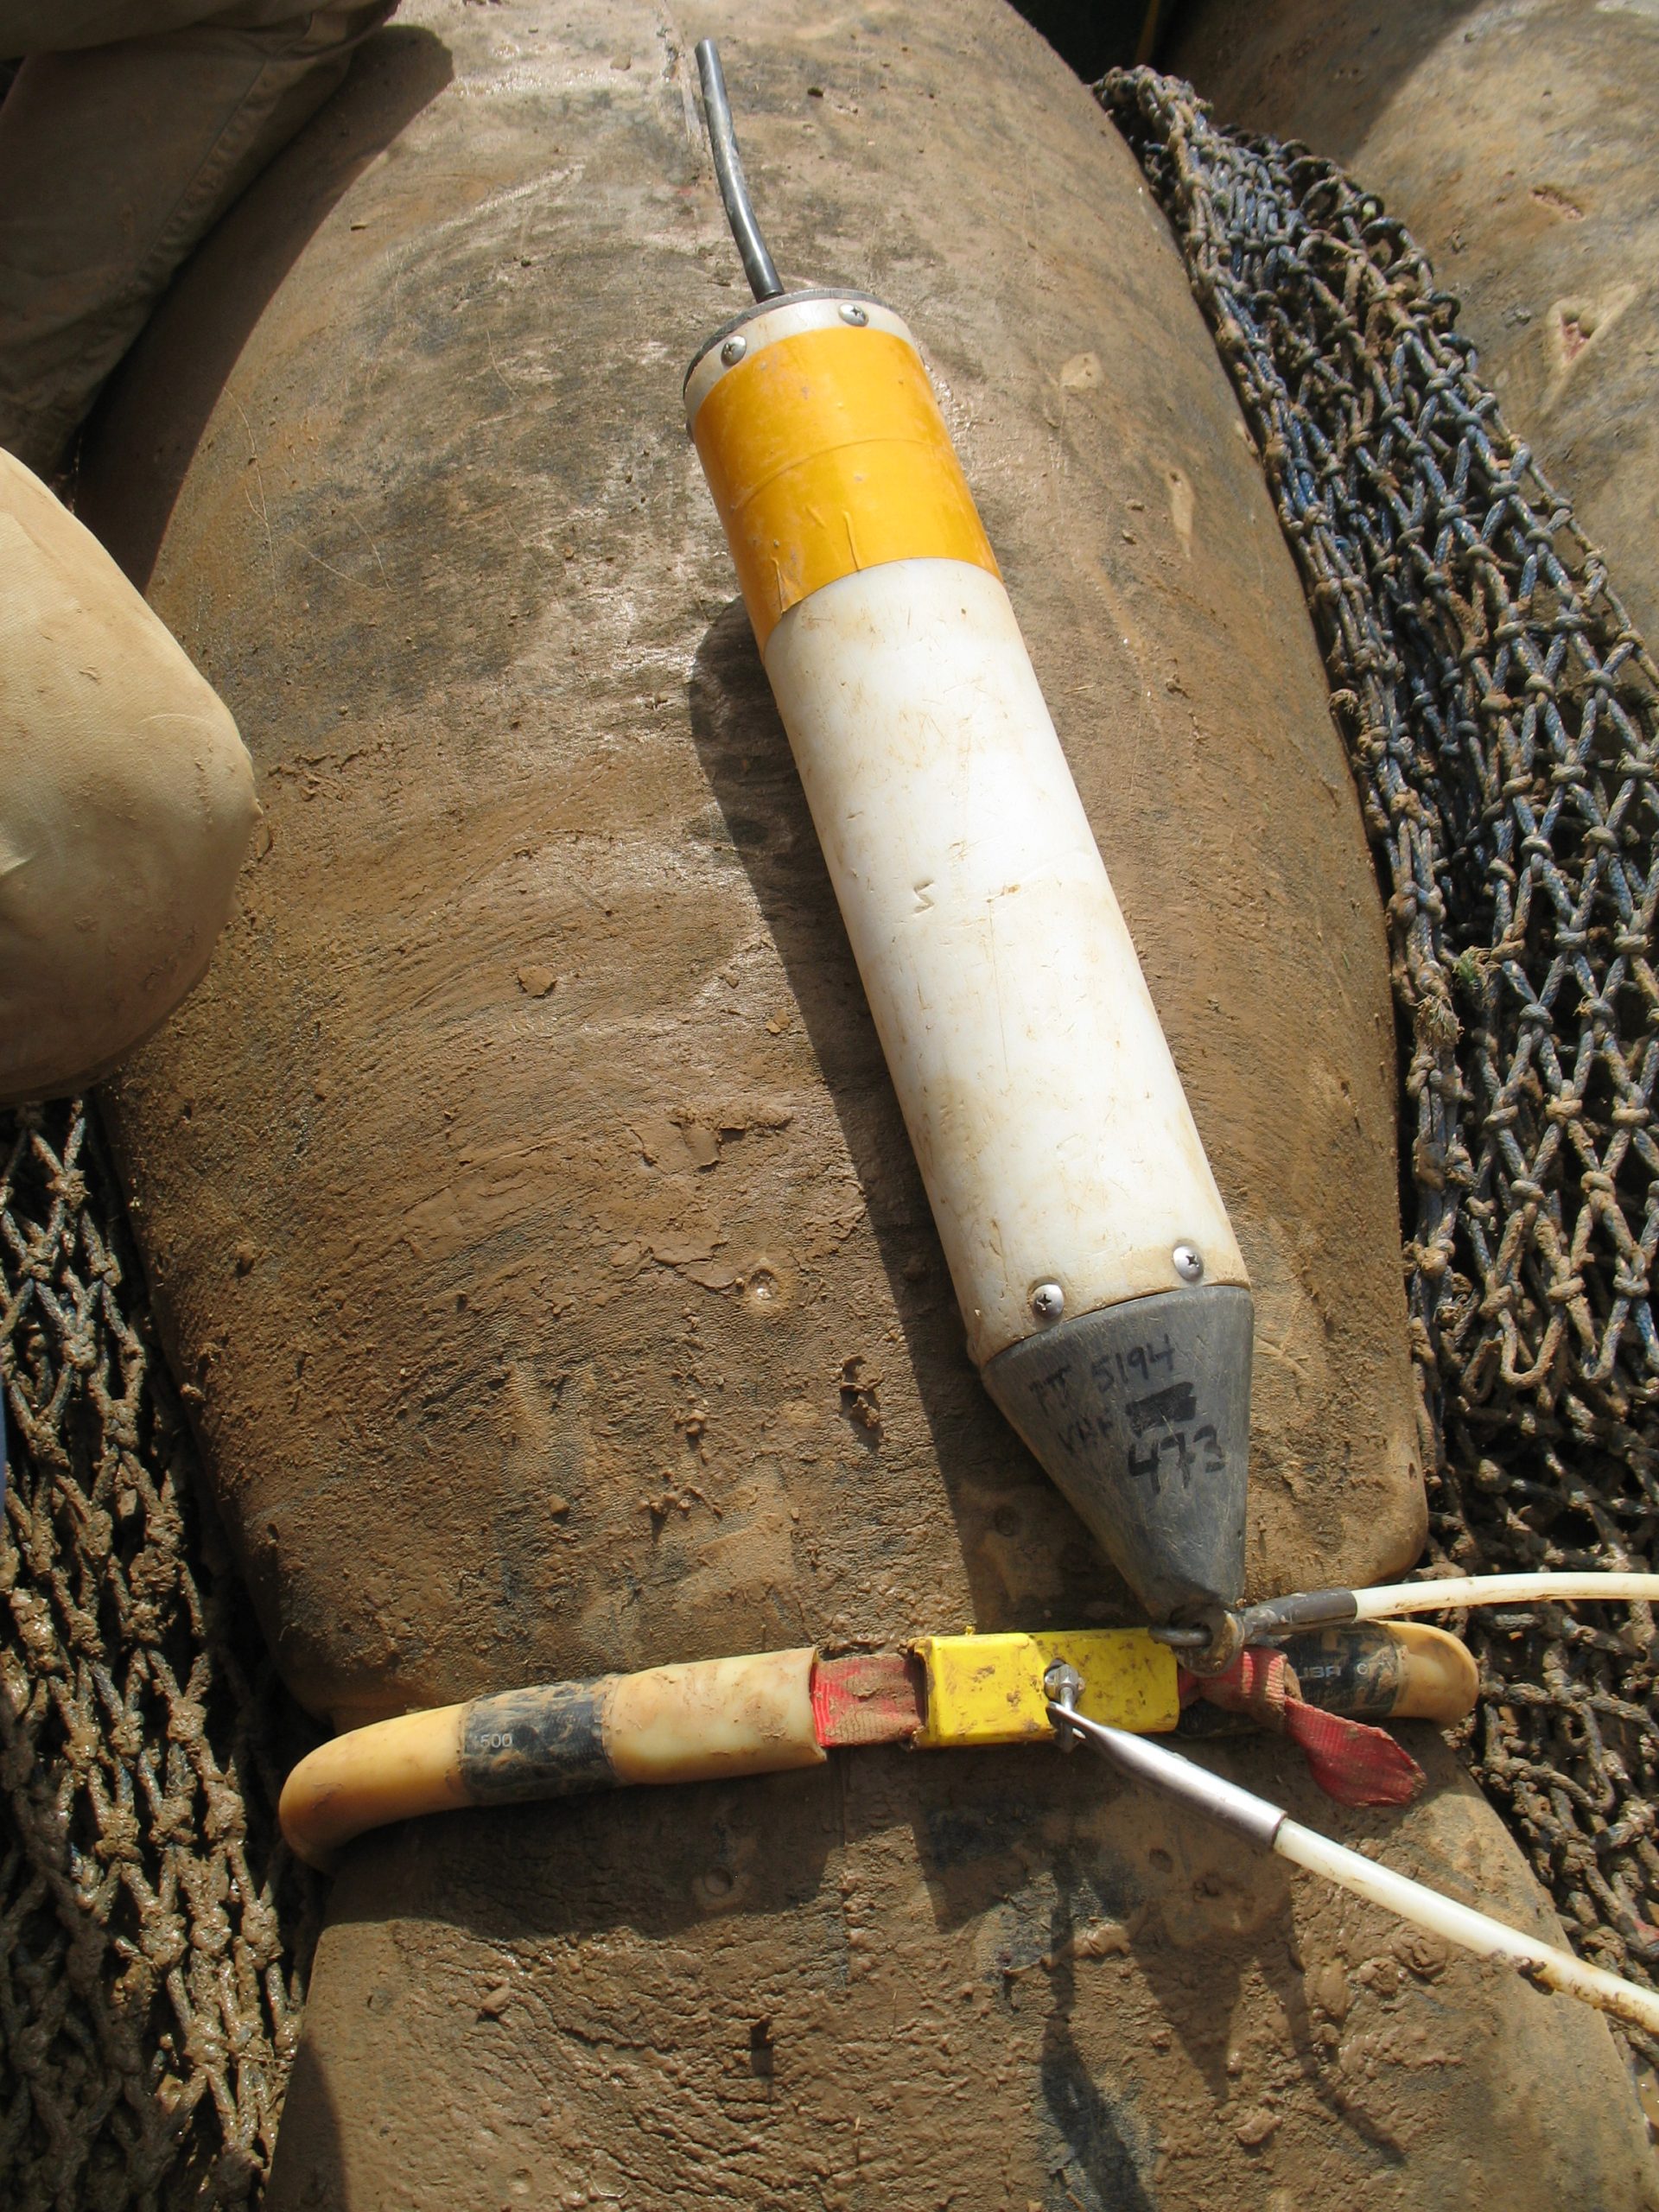 Argos PTT attachment through a tether by a belt to the caudal peduncle of a female African manatee